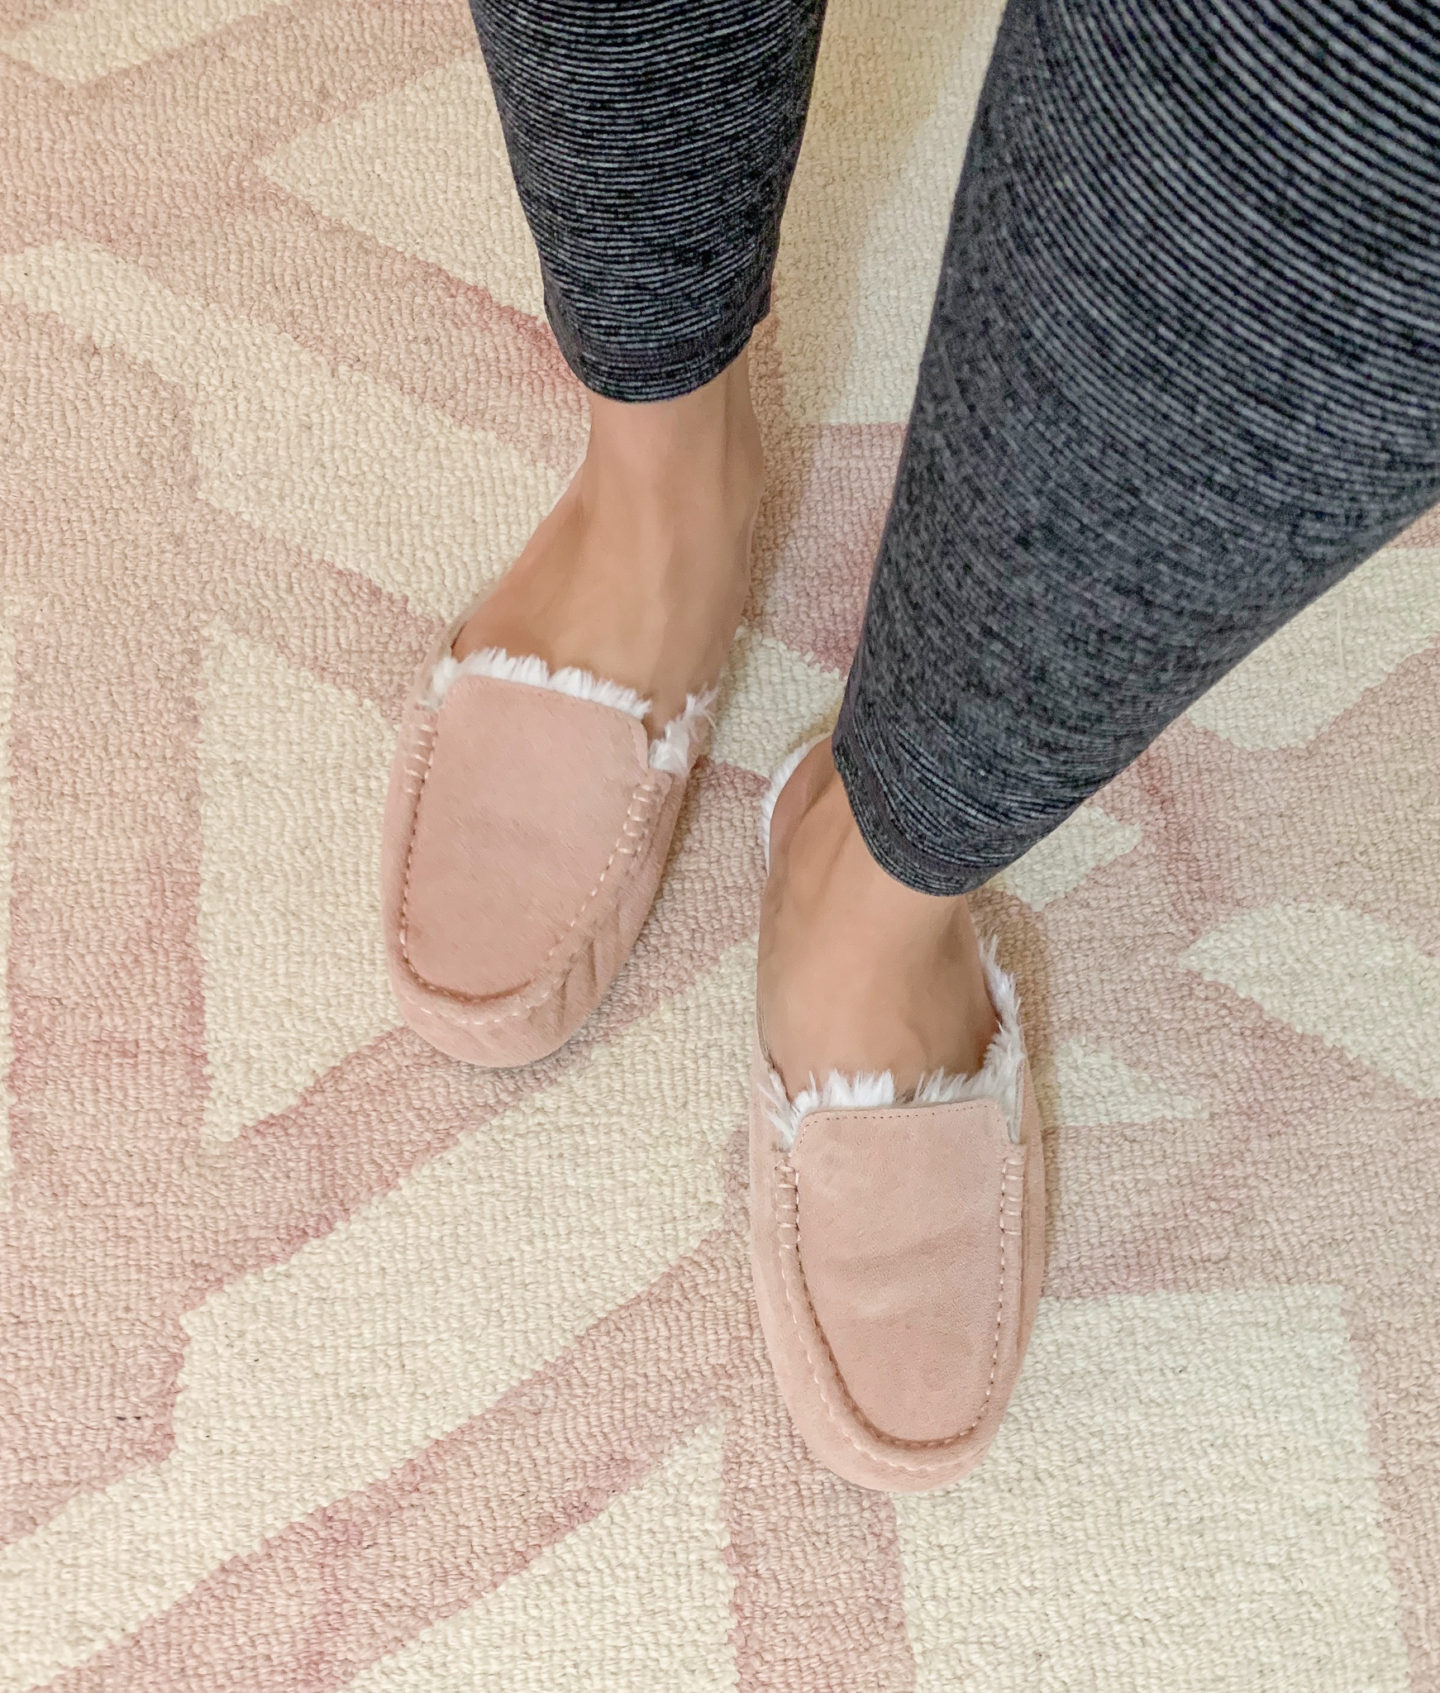 Pink Moccasin Slippers, Affordable cute slippers, chic loungewear